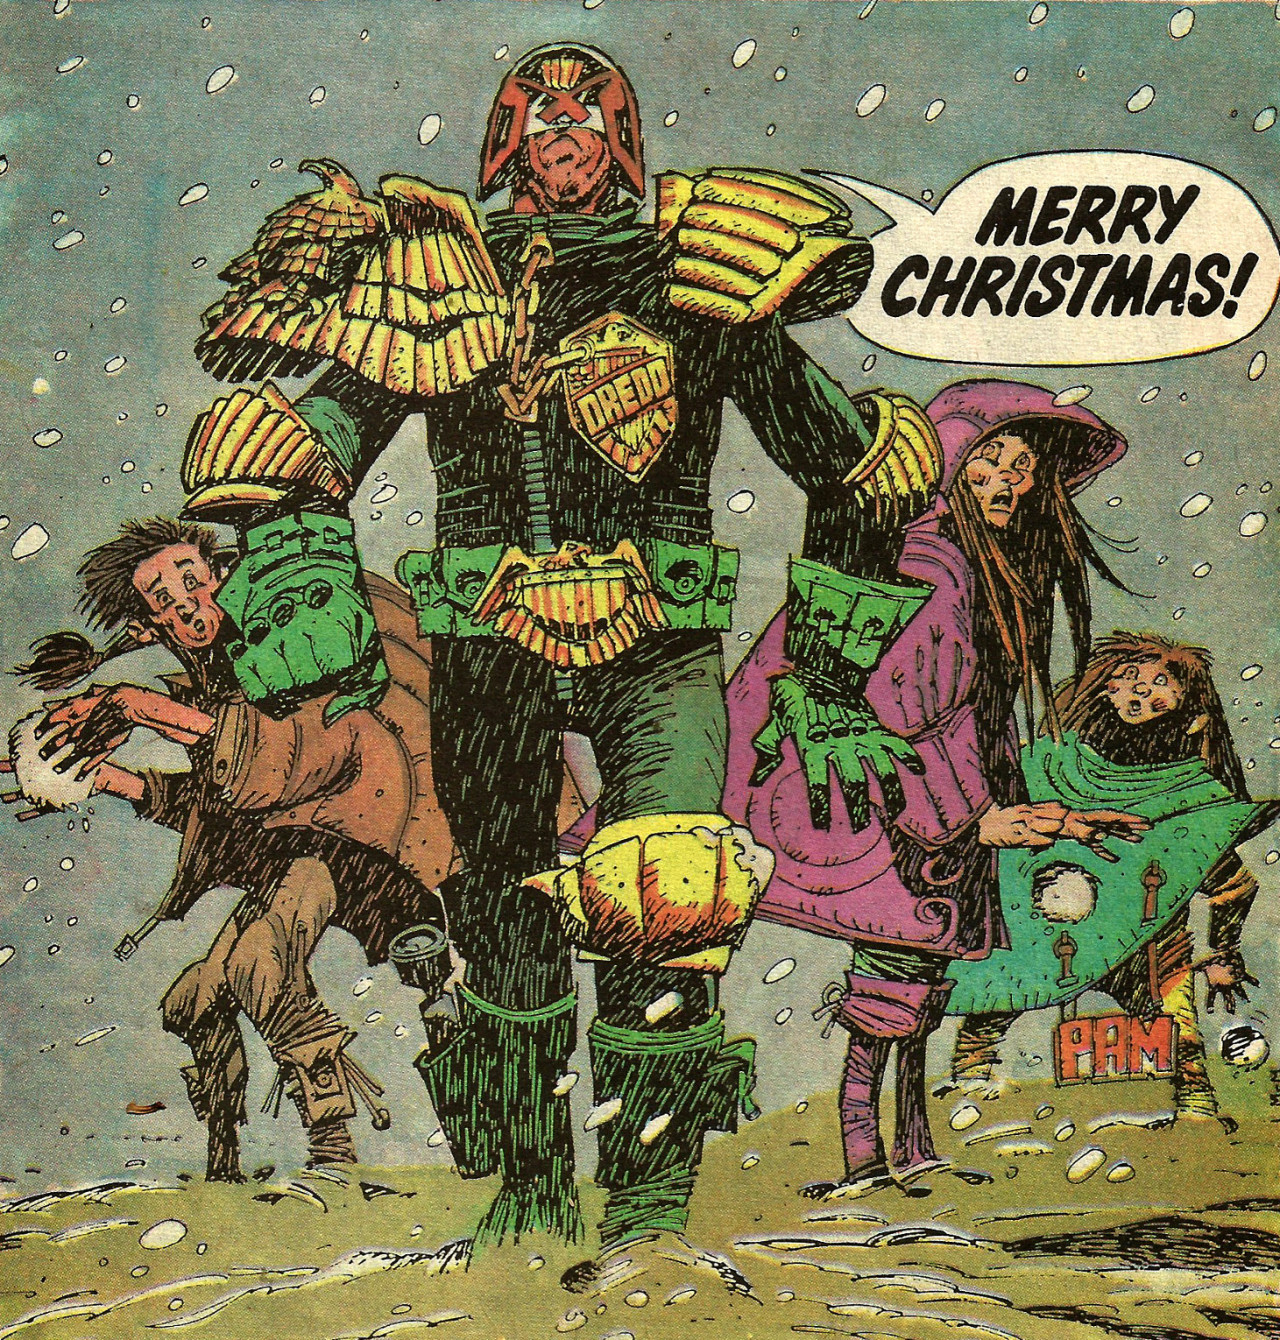 Panel from Judge Dredd No.6 (Quality Comics, 1987). Art by Steve Dillon. From Oxfam